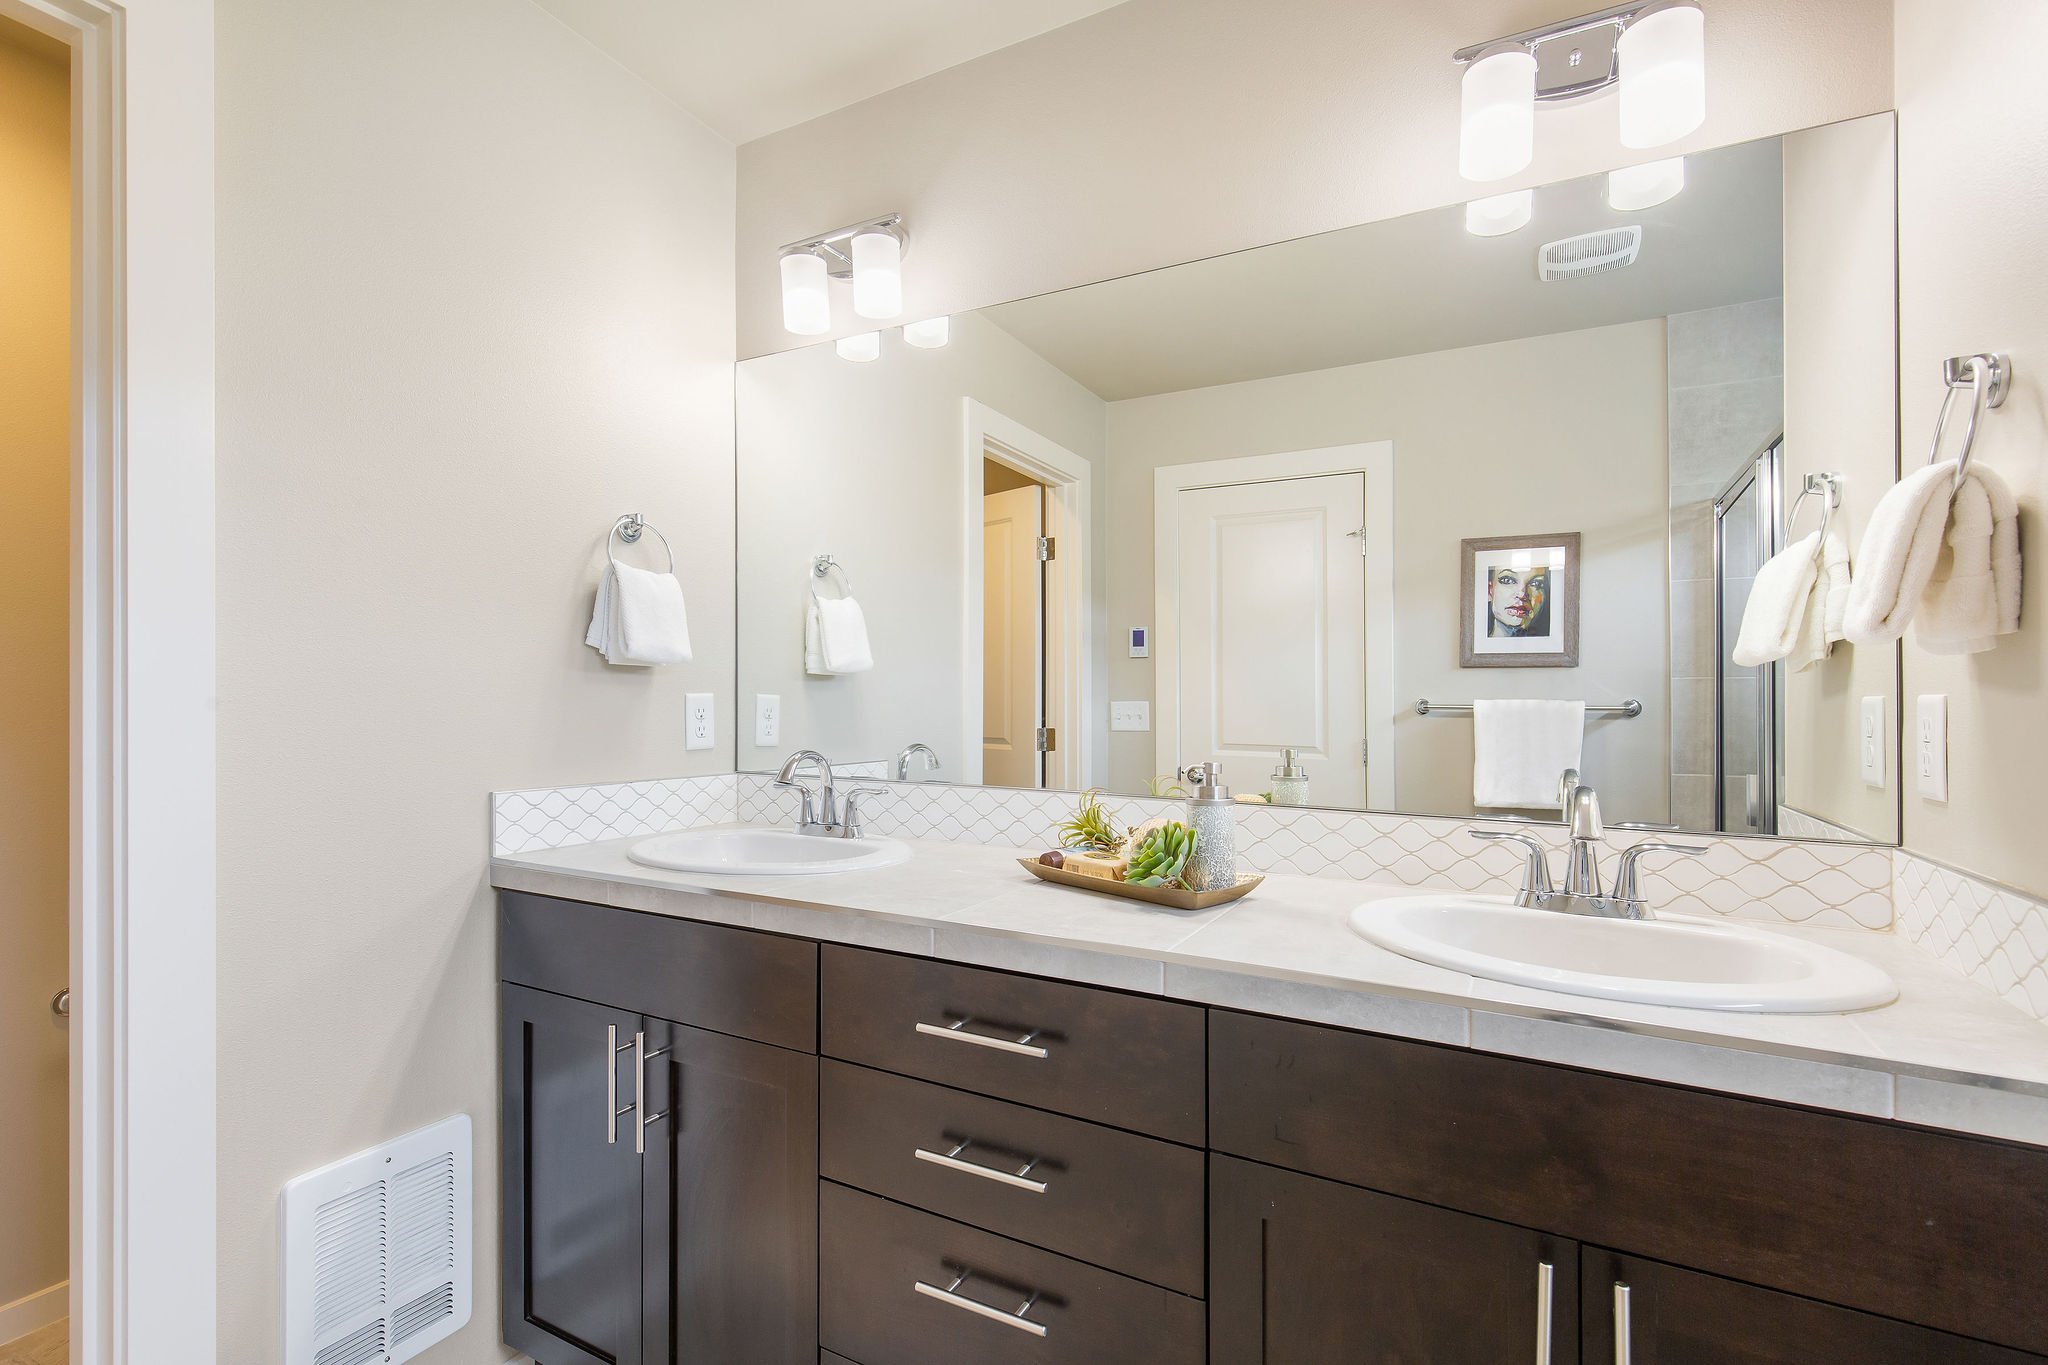  interior of master bathroom with 2 sinks  